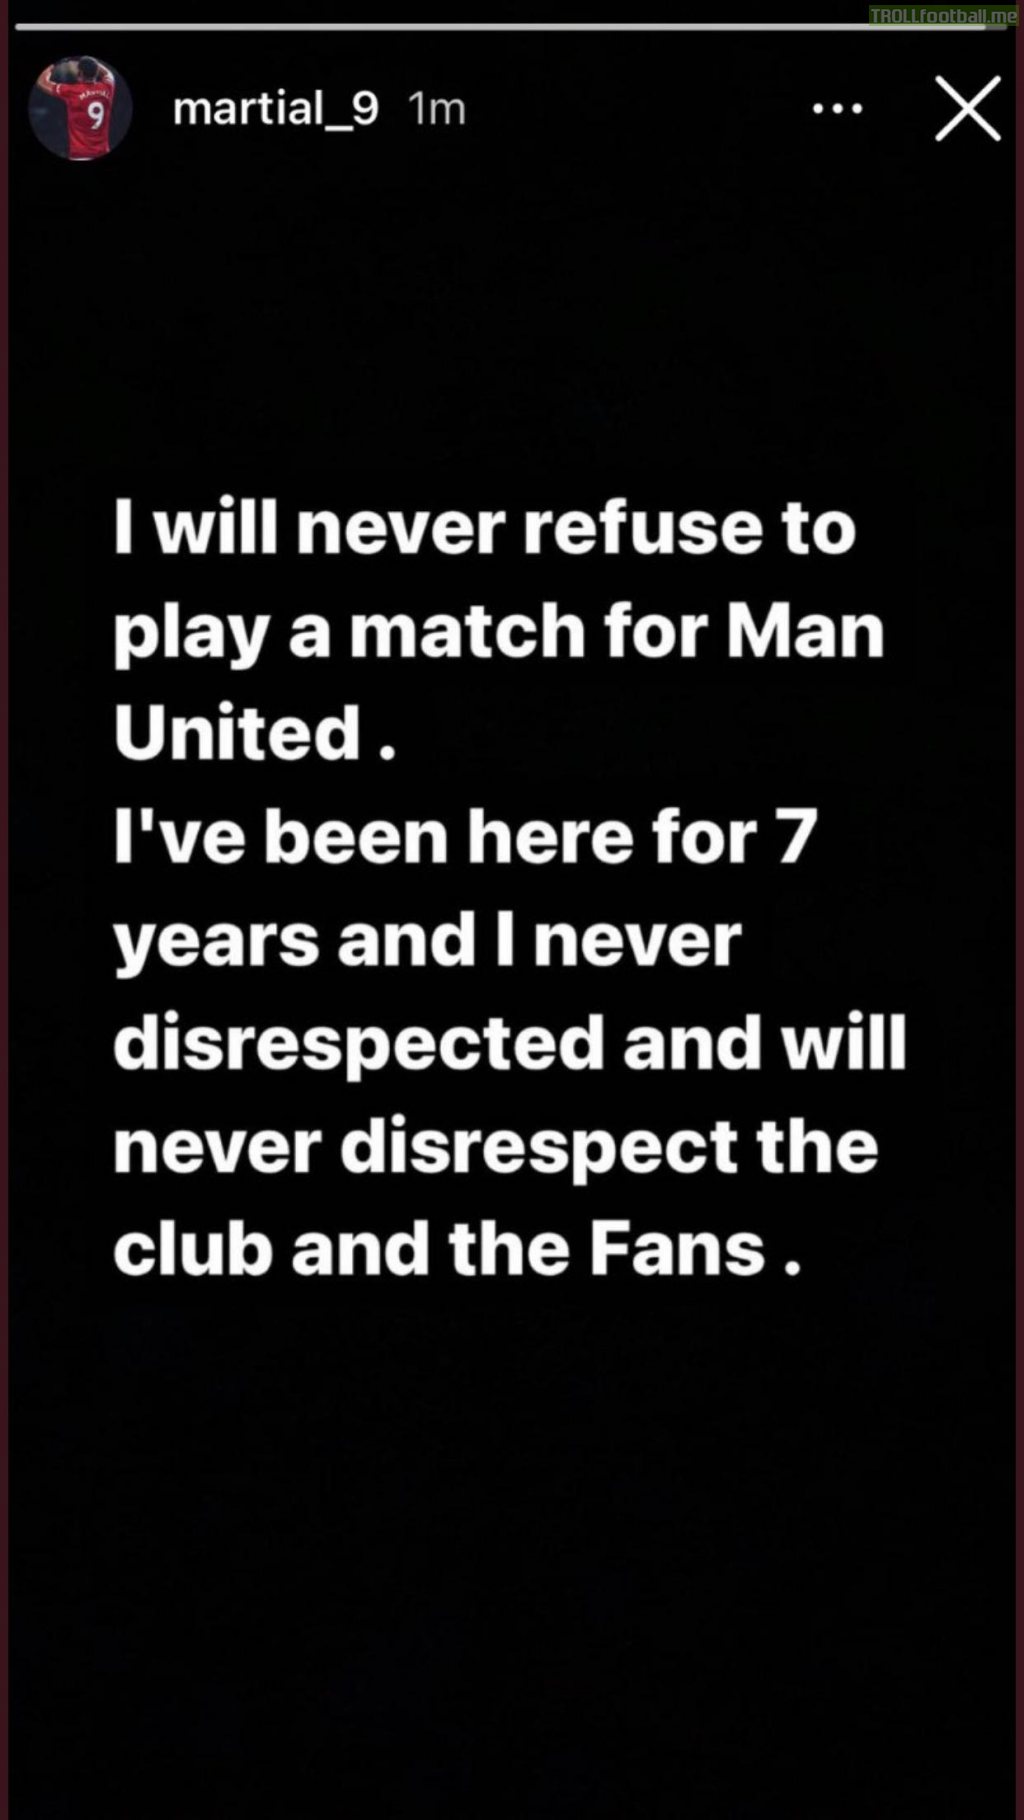 [Anthony Martial on Instagram] “I will never refuse to play a match for Man United. I’ve played for Man United for 7 years and I never disrespected and will never disrespect the club and the fans”